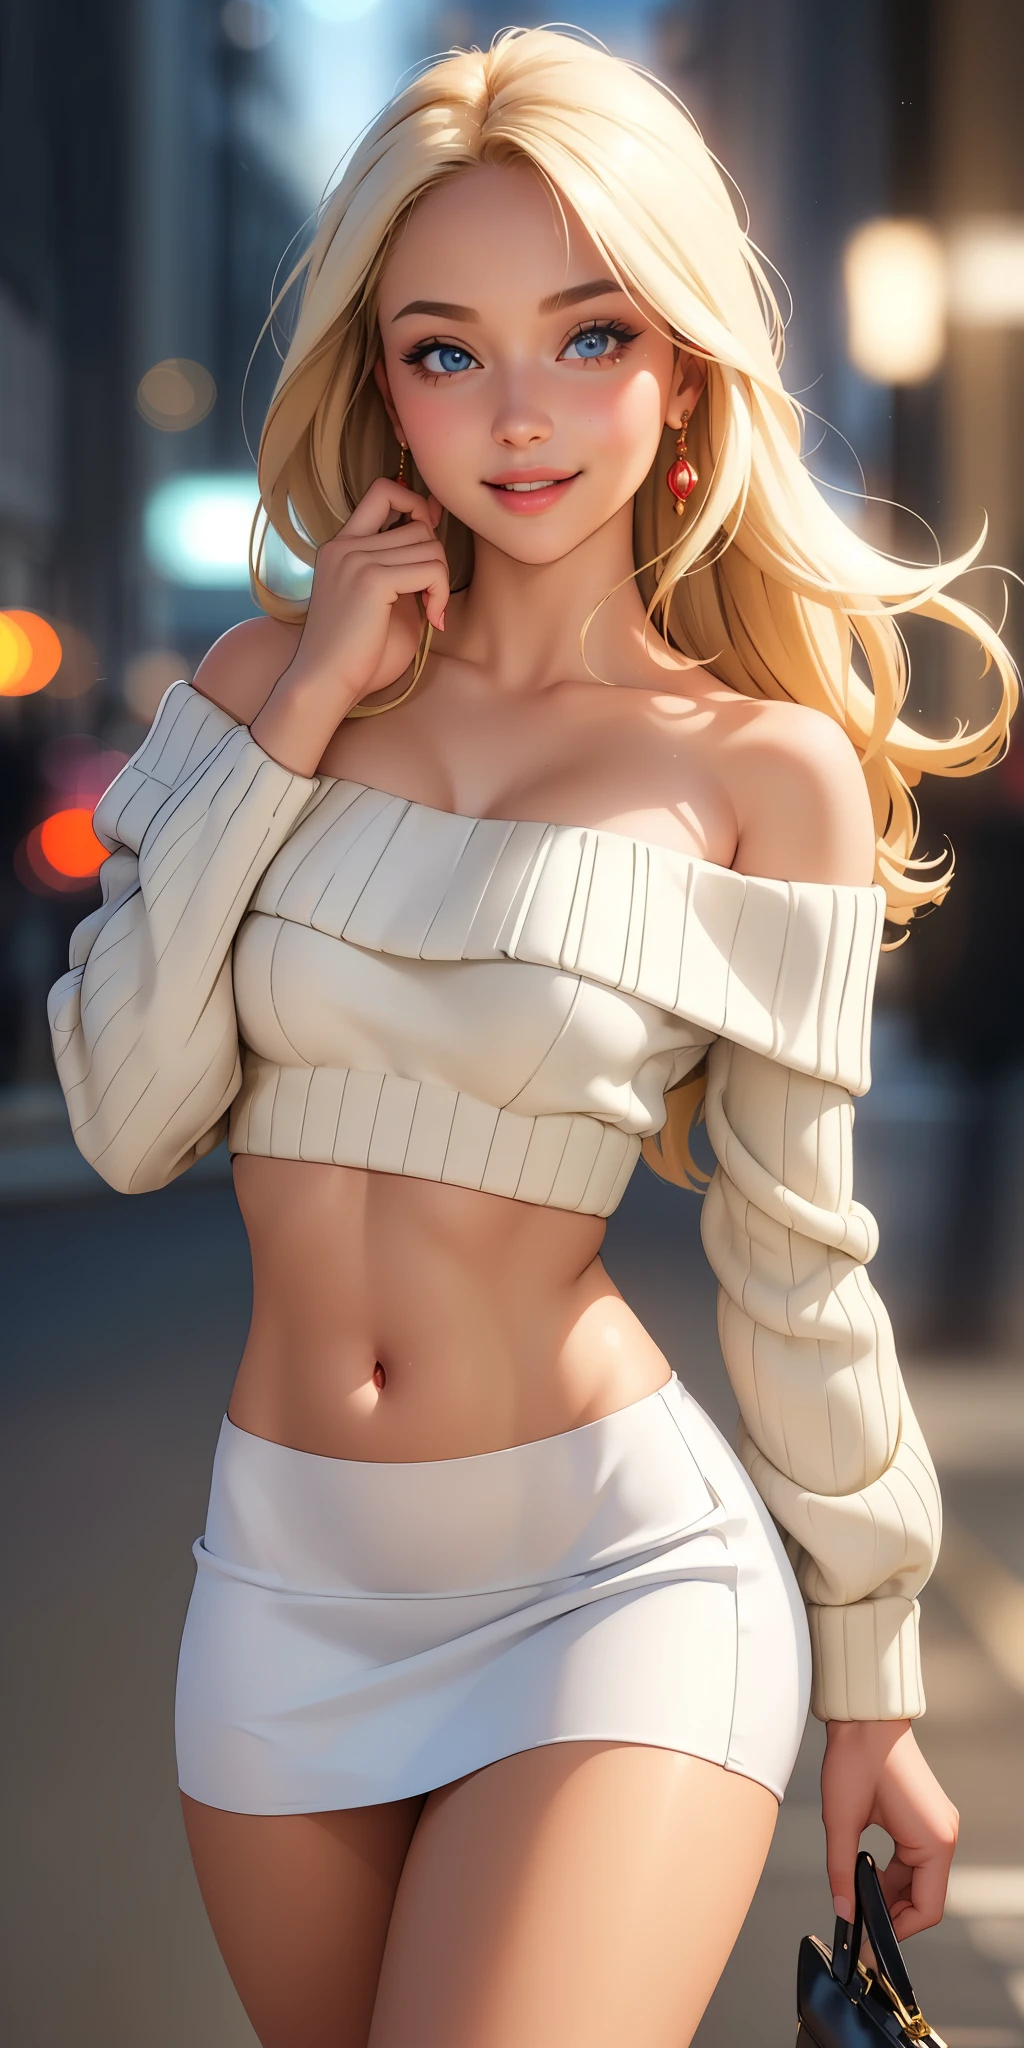 (best quality, ultra-detailed, photorealistic: 1.39), Face of naughty 19 year old teenager, bright and vibrant colors, studio lighting, romantic expression, beautiful detailed off-shoulder sweater:1.2  , sensual white mini skirt, elegant makeup, long blonder hair flowing in the wind, attractive eyes, lips bright, sexy pose, beautiful roses, smiling confidently and seductively, posing for a professional photo shoot, shallow depth of field, soft natural lighting, creating a dreamy and magical atmosphere. on the street, night